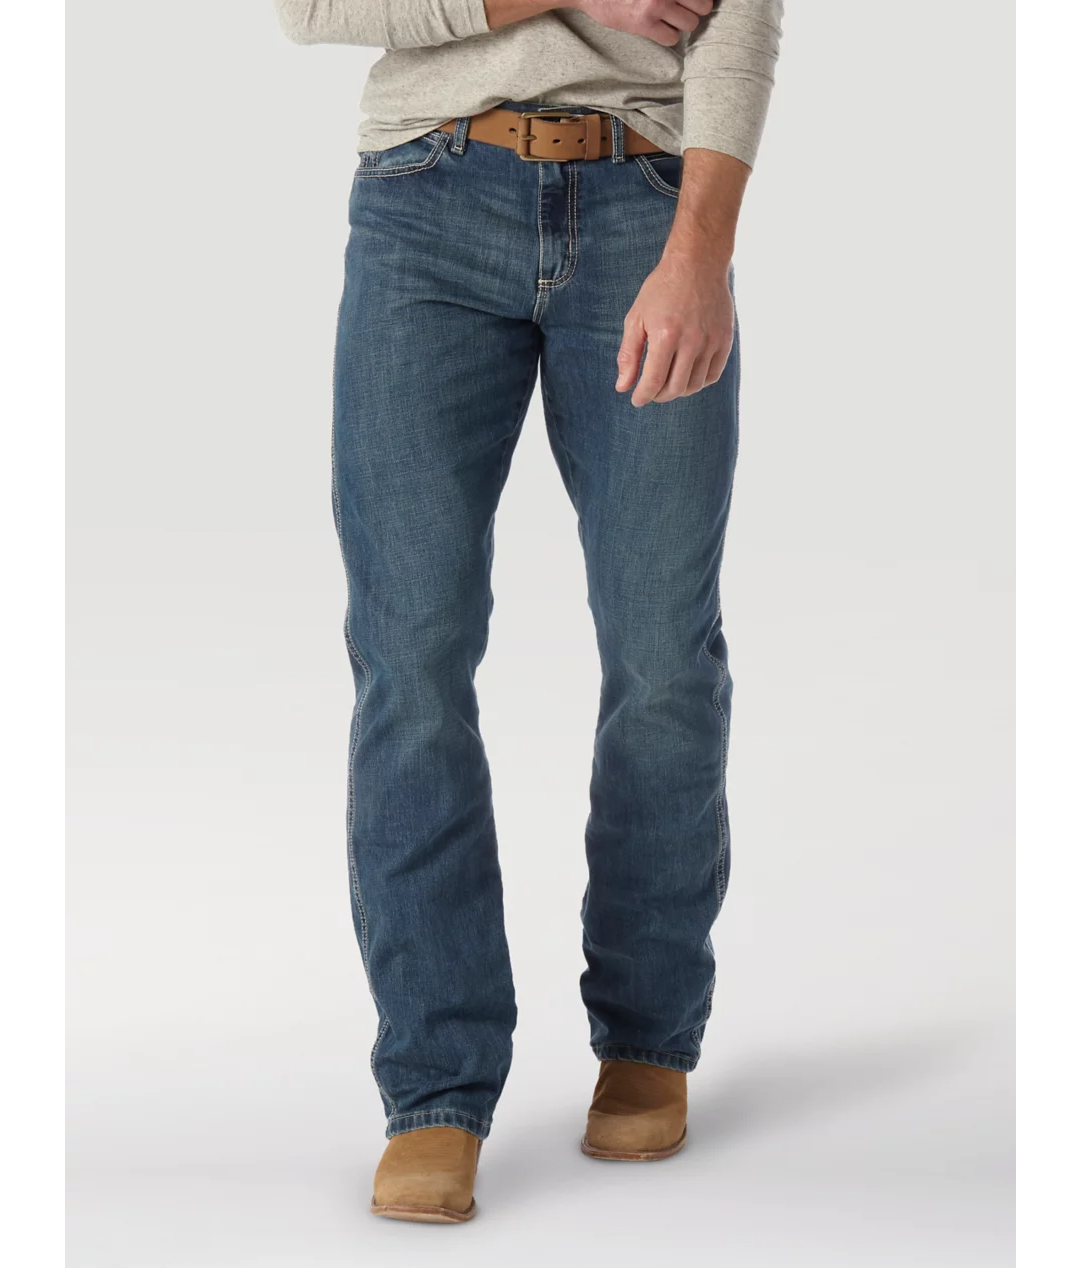 MEN'S WRANGLER RETRO RELAXED FIT BOOTCUT JEAN IN ROCKY TOP